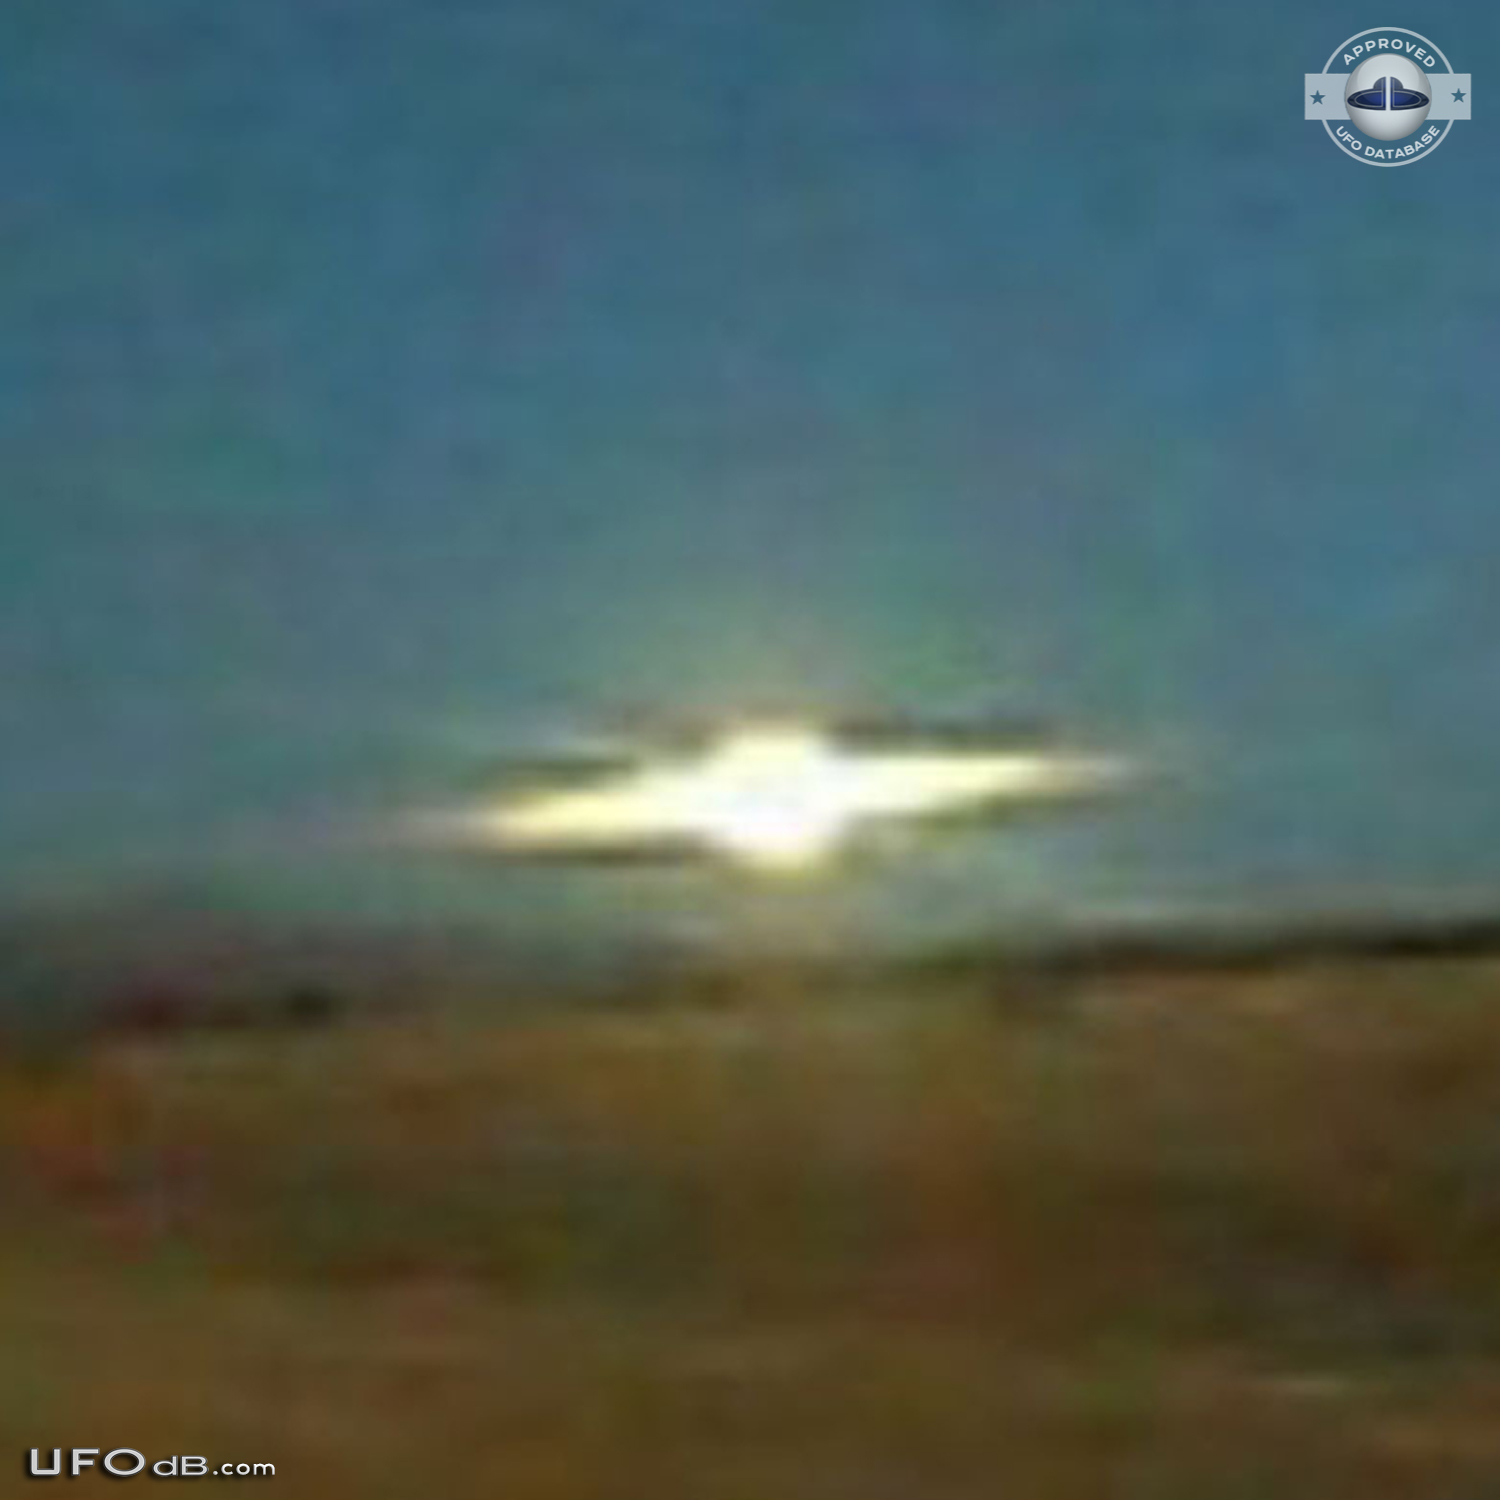 1973 UFO picture coming from South Pacific New Caledonia island UFO Picture #426-3